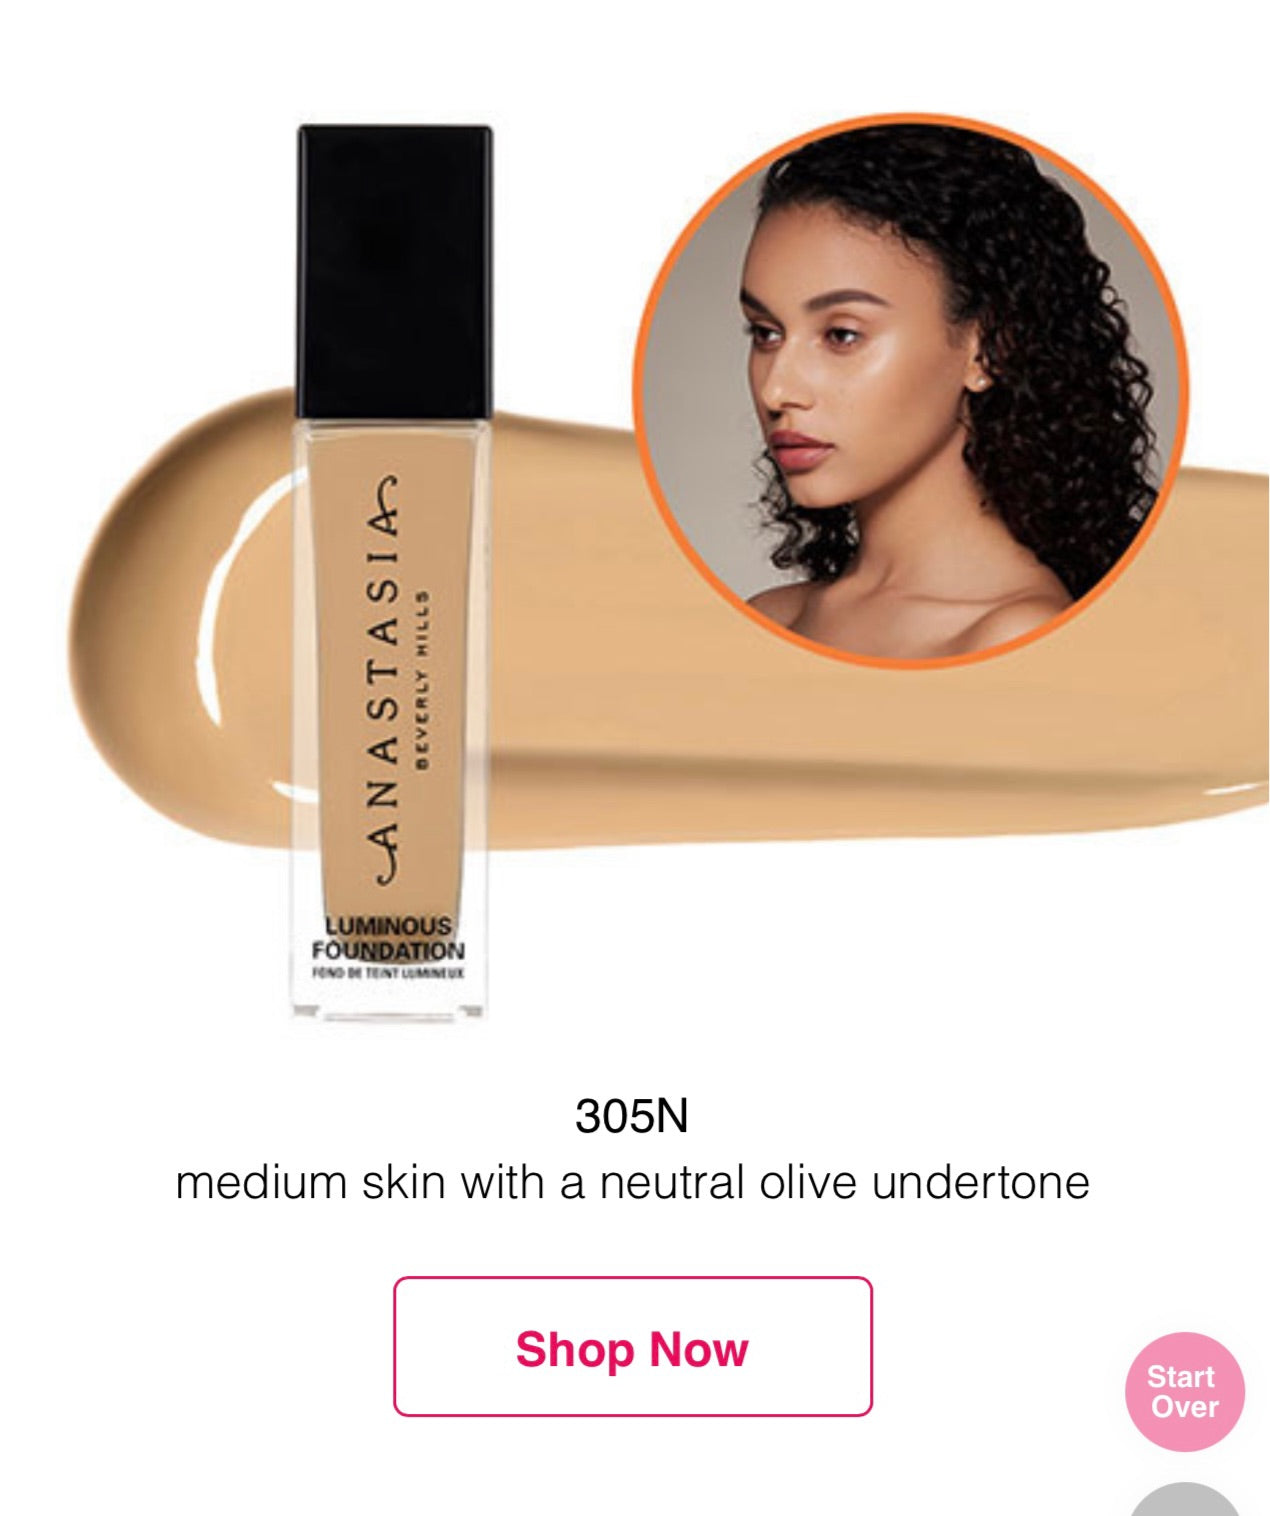 hills – 305N Le anastasia filles beverly des foundation coin luminous